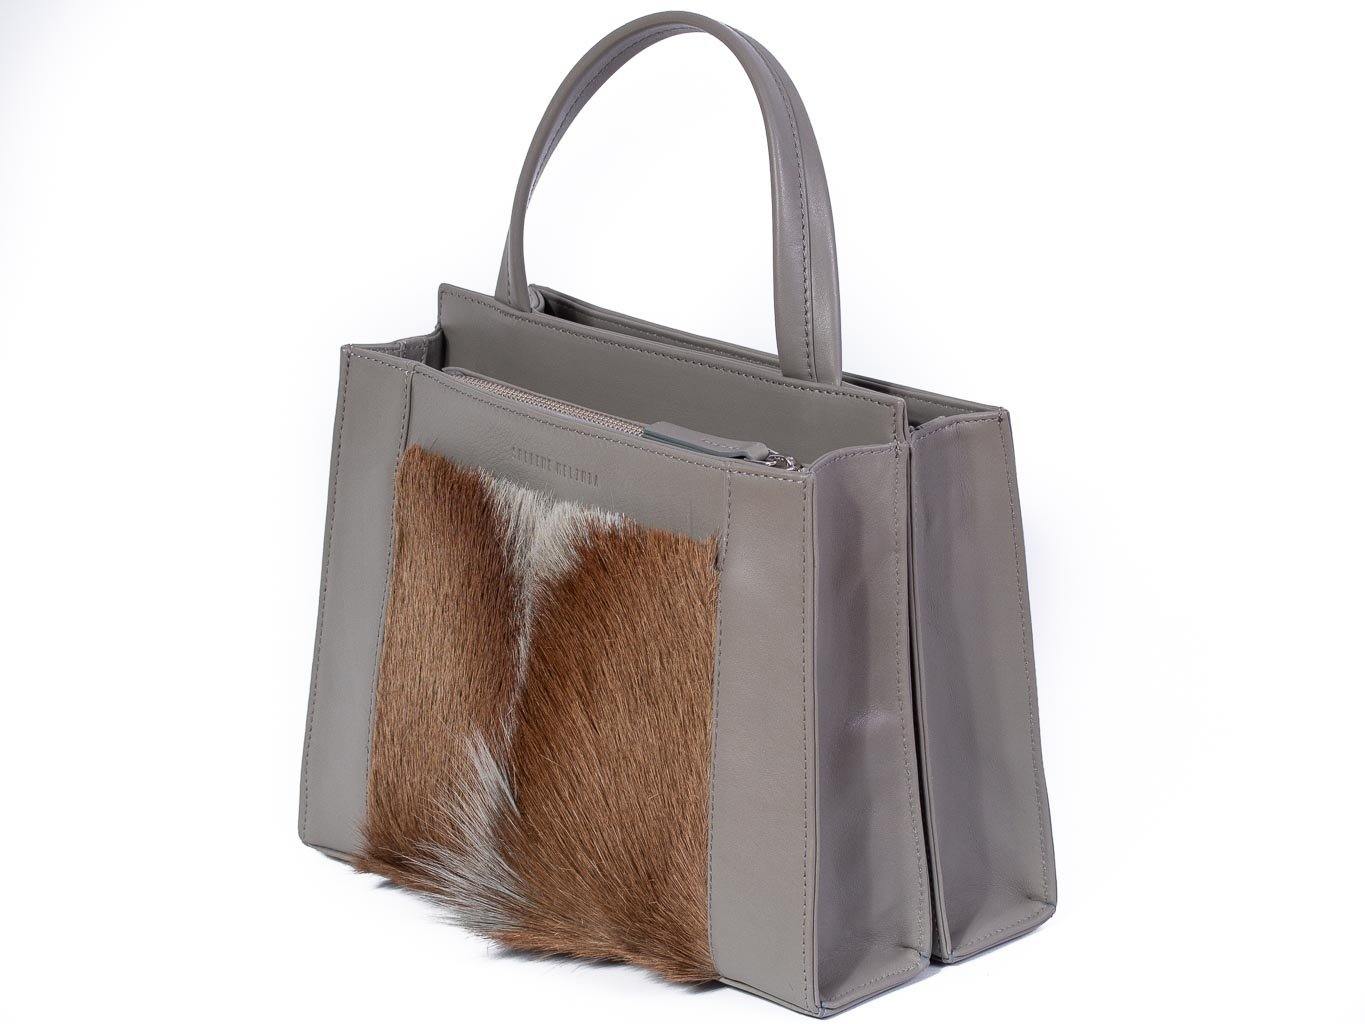 Top Handle Springbok Handbag in Slate Grey with a fan feature by Sherene Melinda side angle